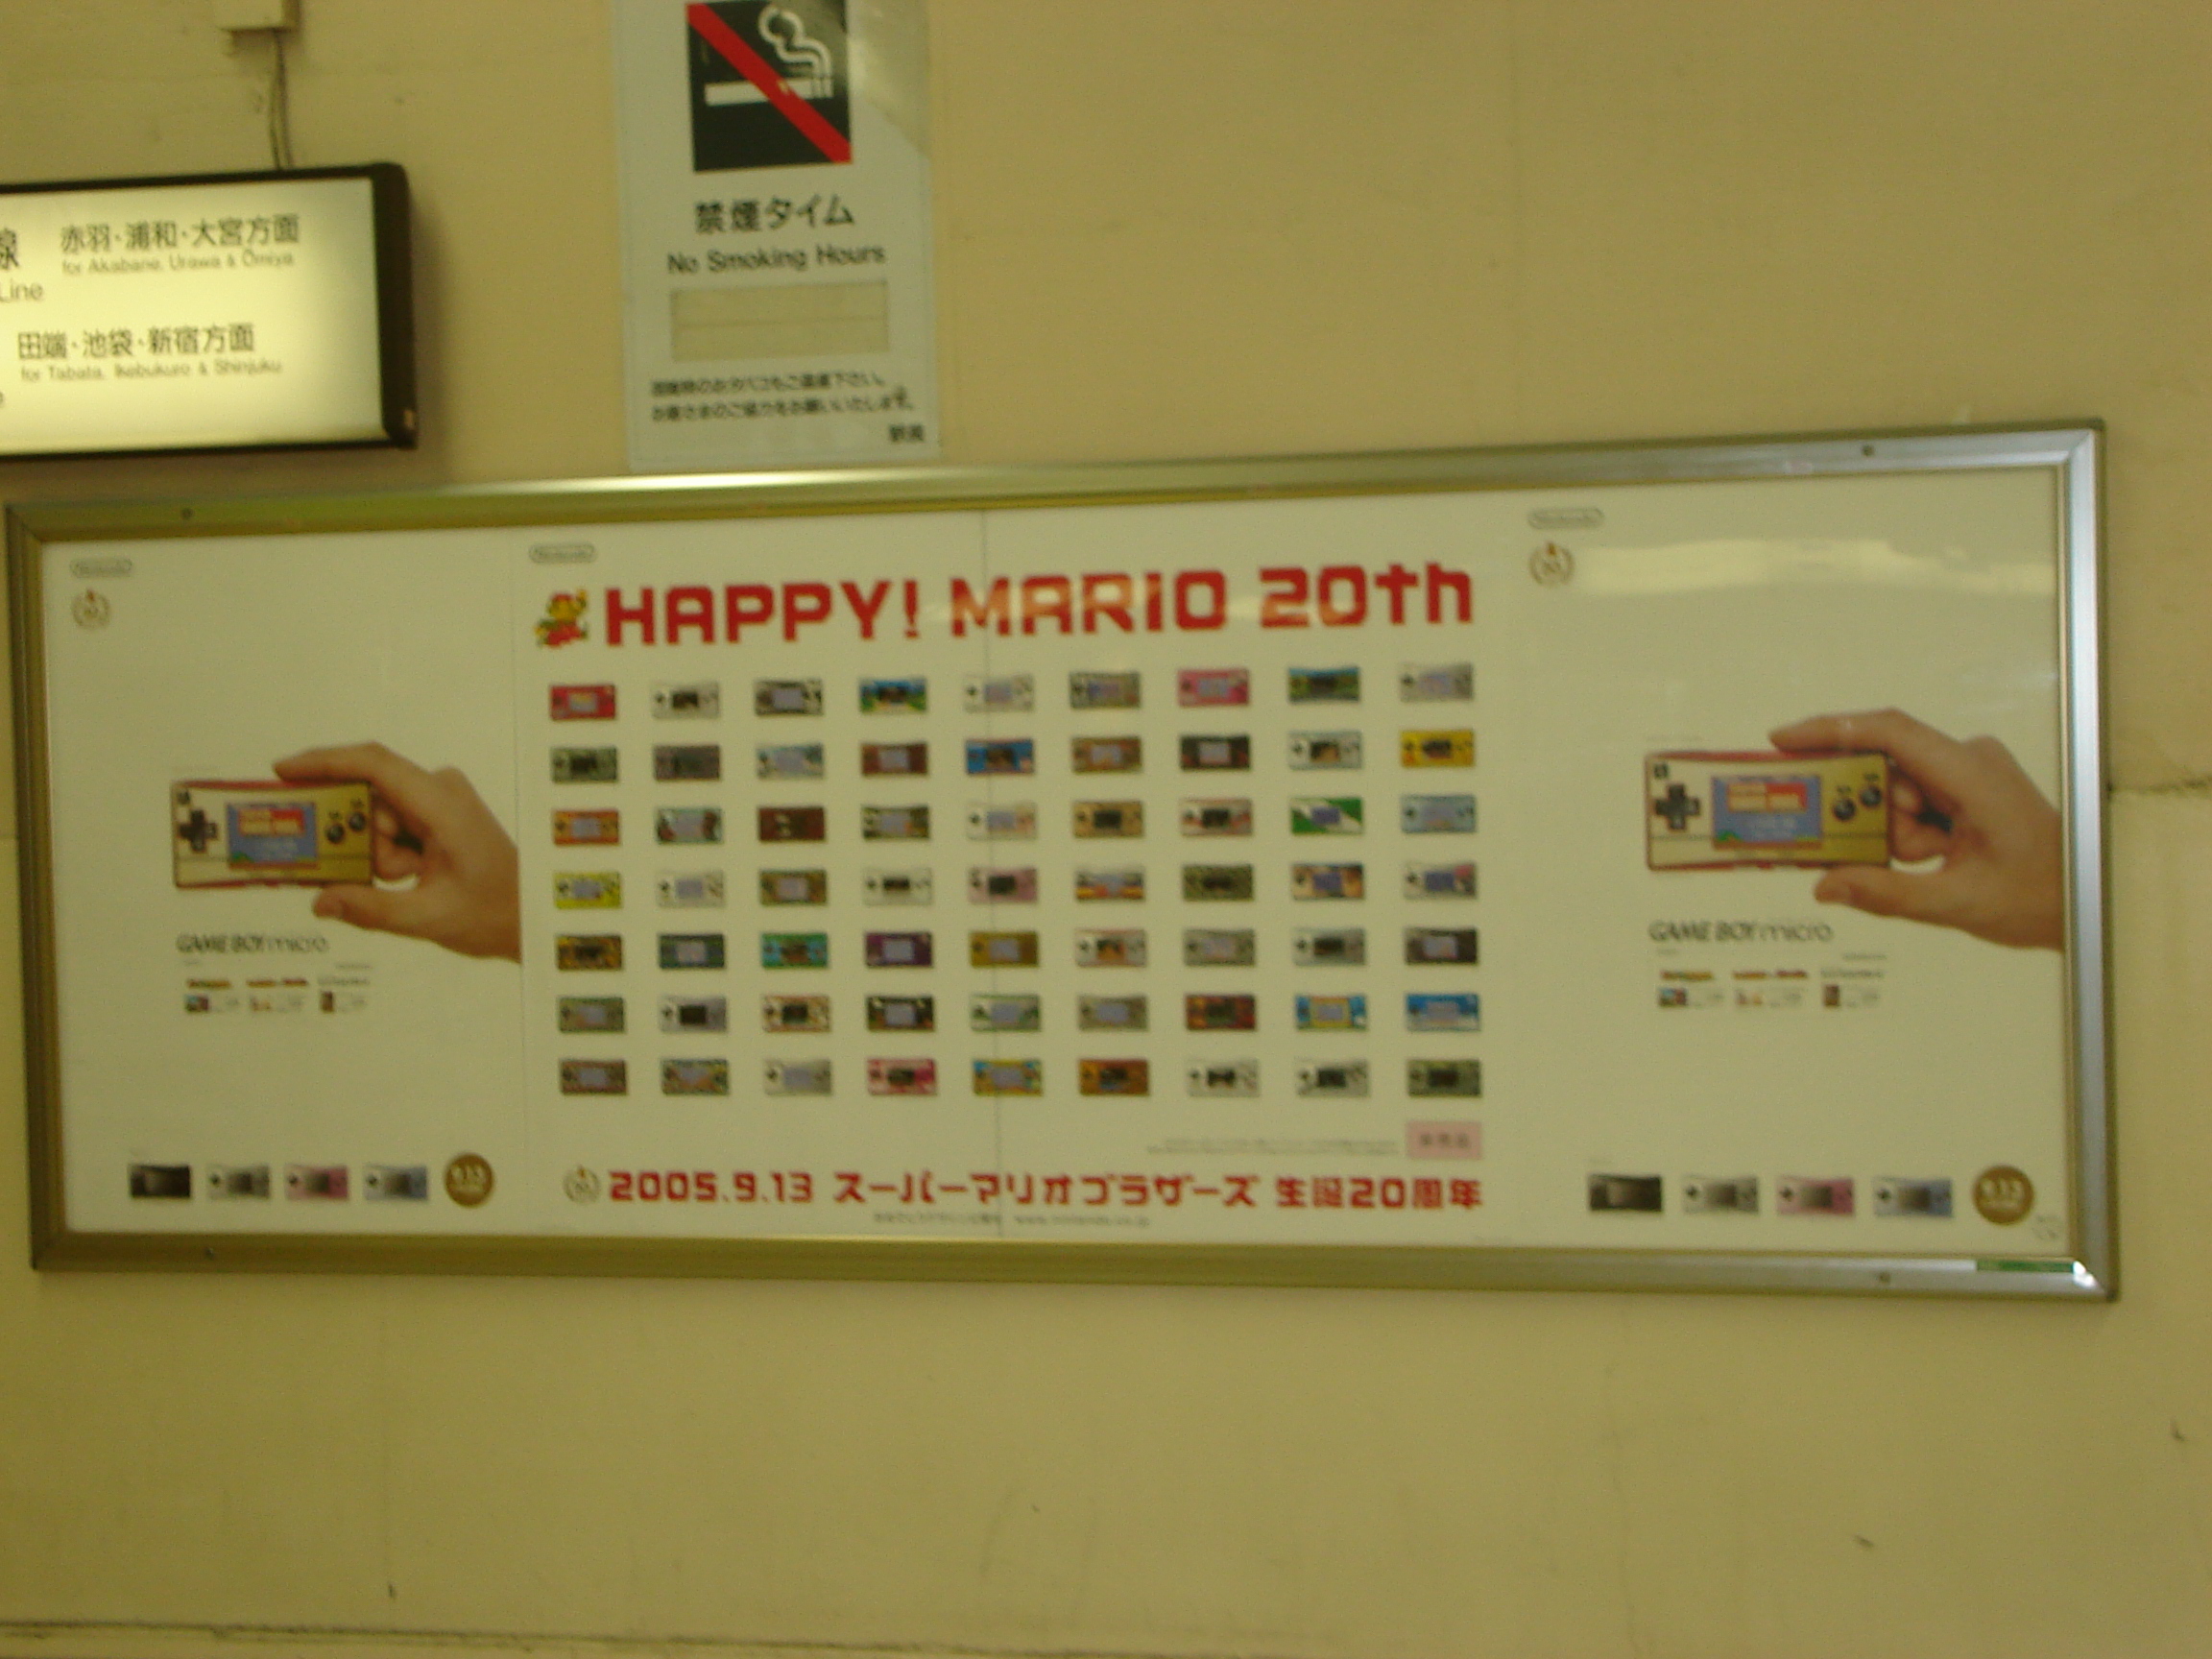 a poster reads happy mario 20th with a grid of game screens and hands holding small portible game consoles